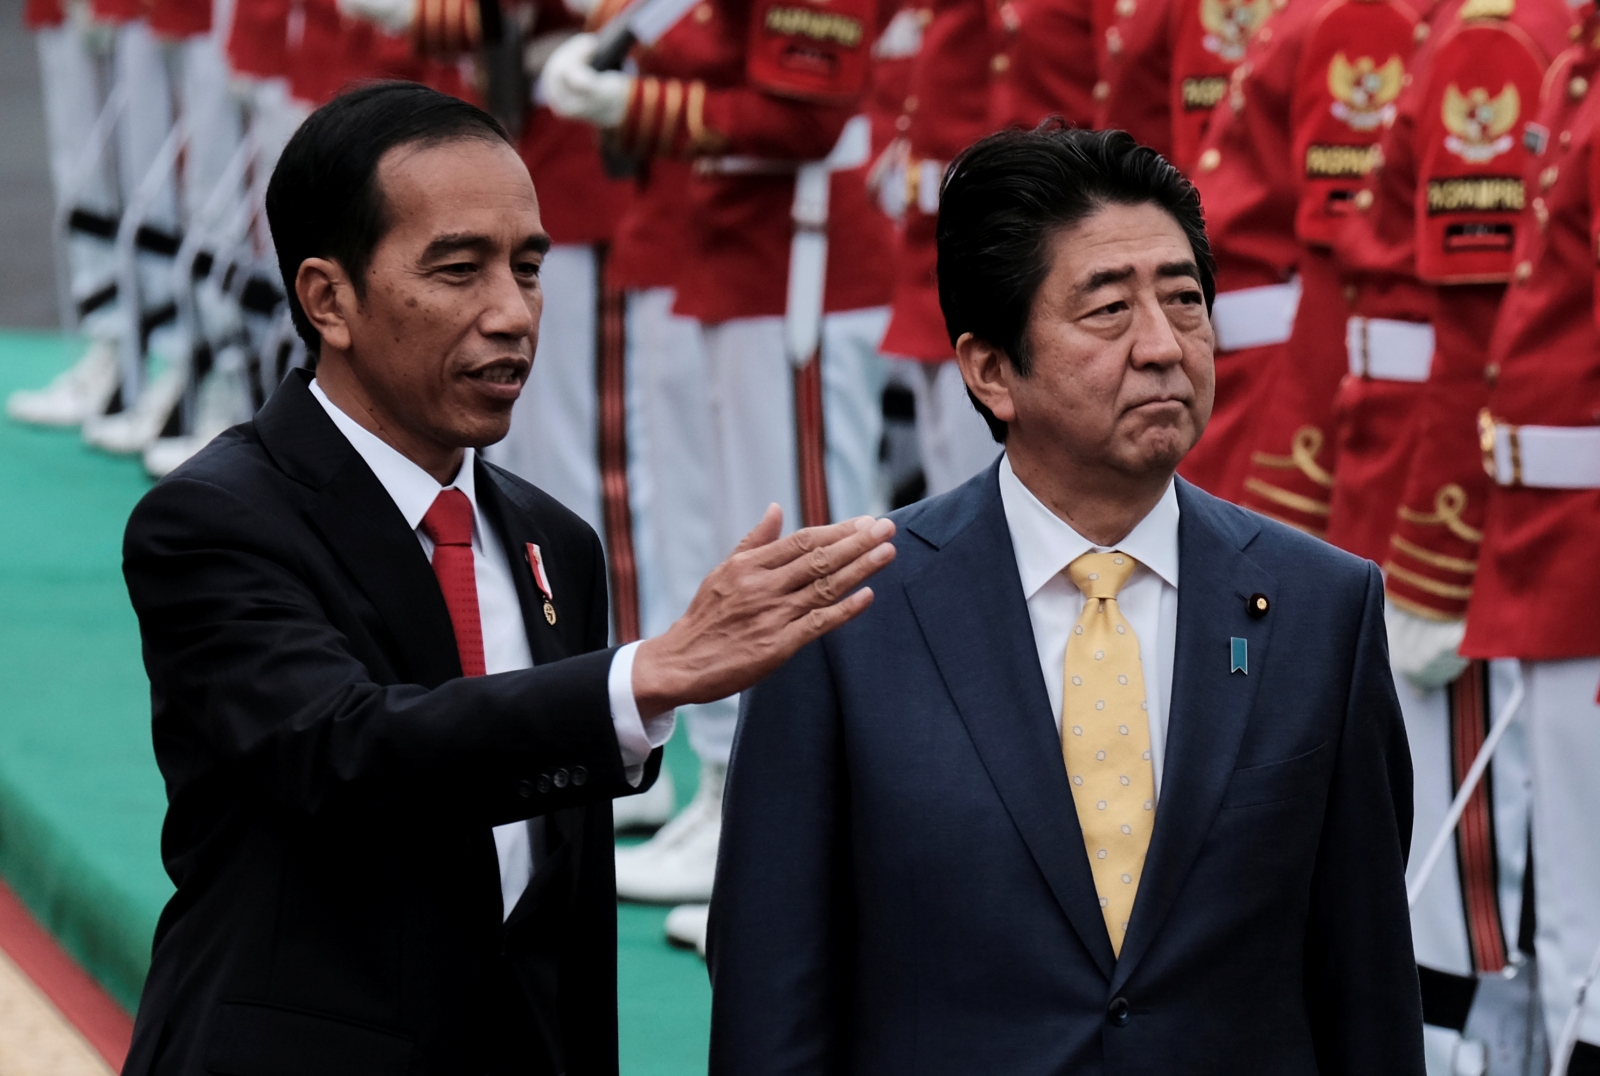 Japan and Indonesia agree to counter Beijing's buildup by boosting maritime cooperation in South China Sea. Source Image: IBTimes UK